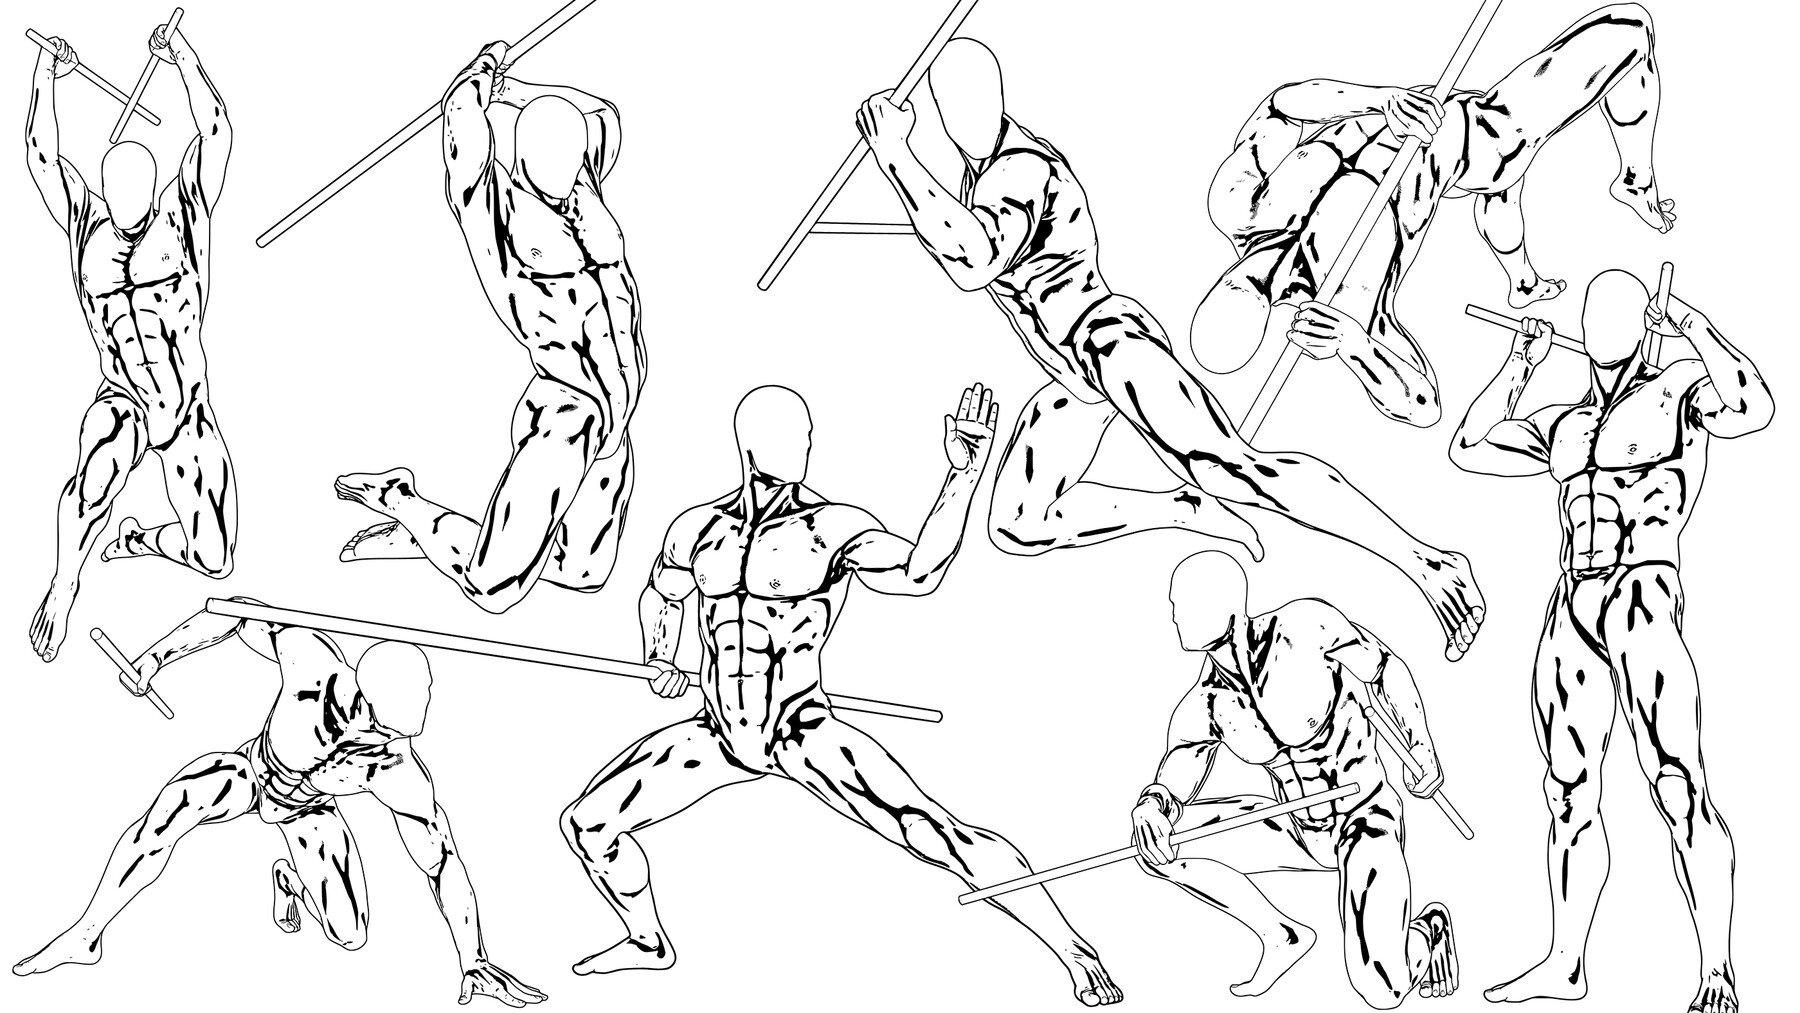 Anime Action Scenes  How to Draw Manga Action Poses Step by Step Lesson   How to Draw Step by Step Drawing Tutorials